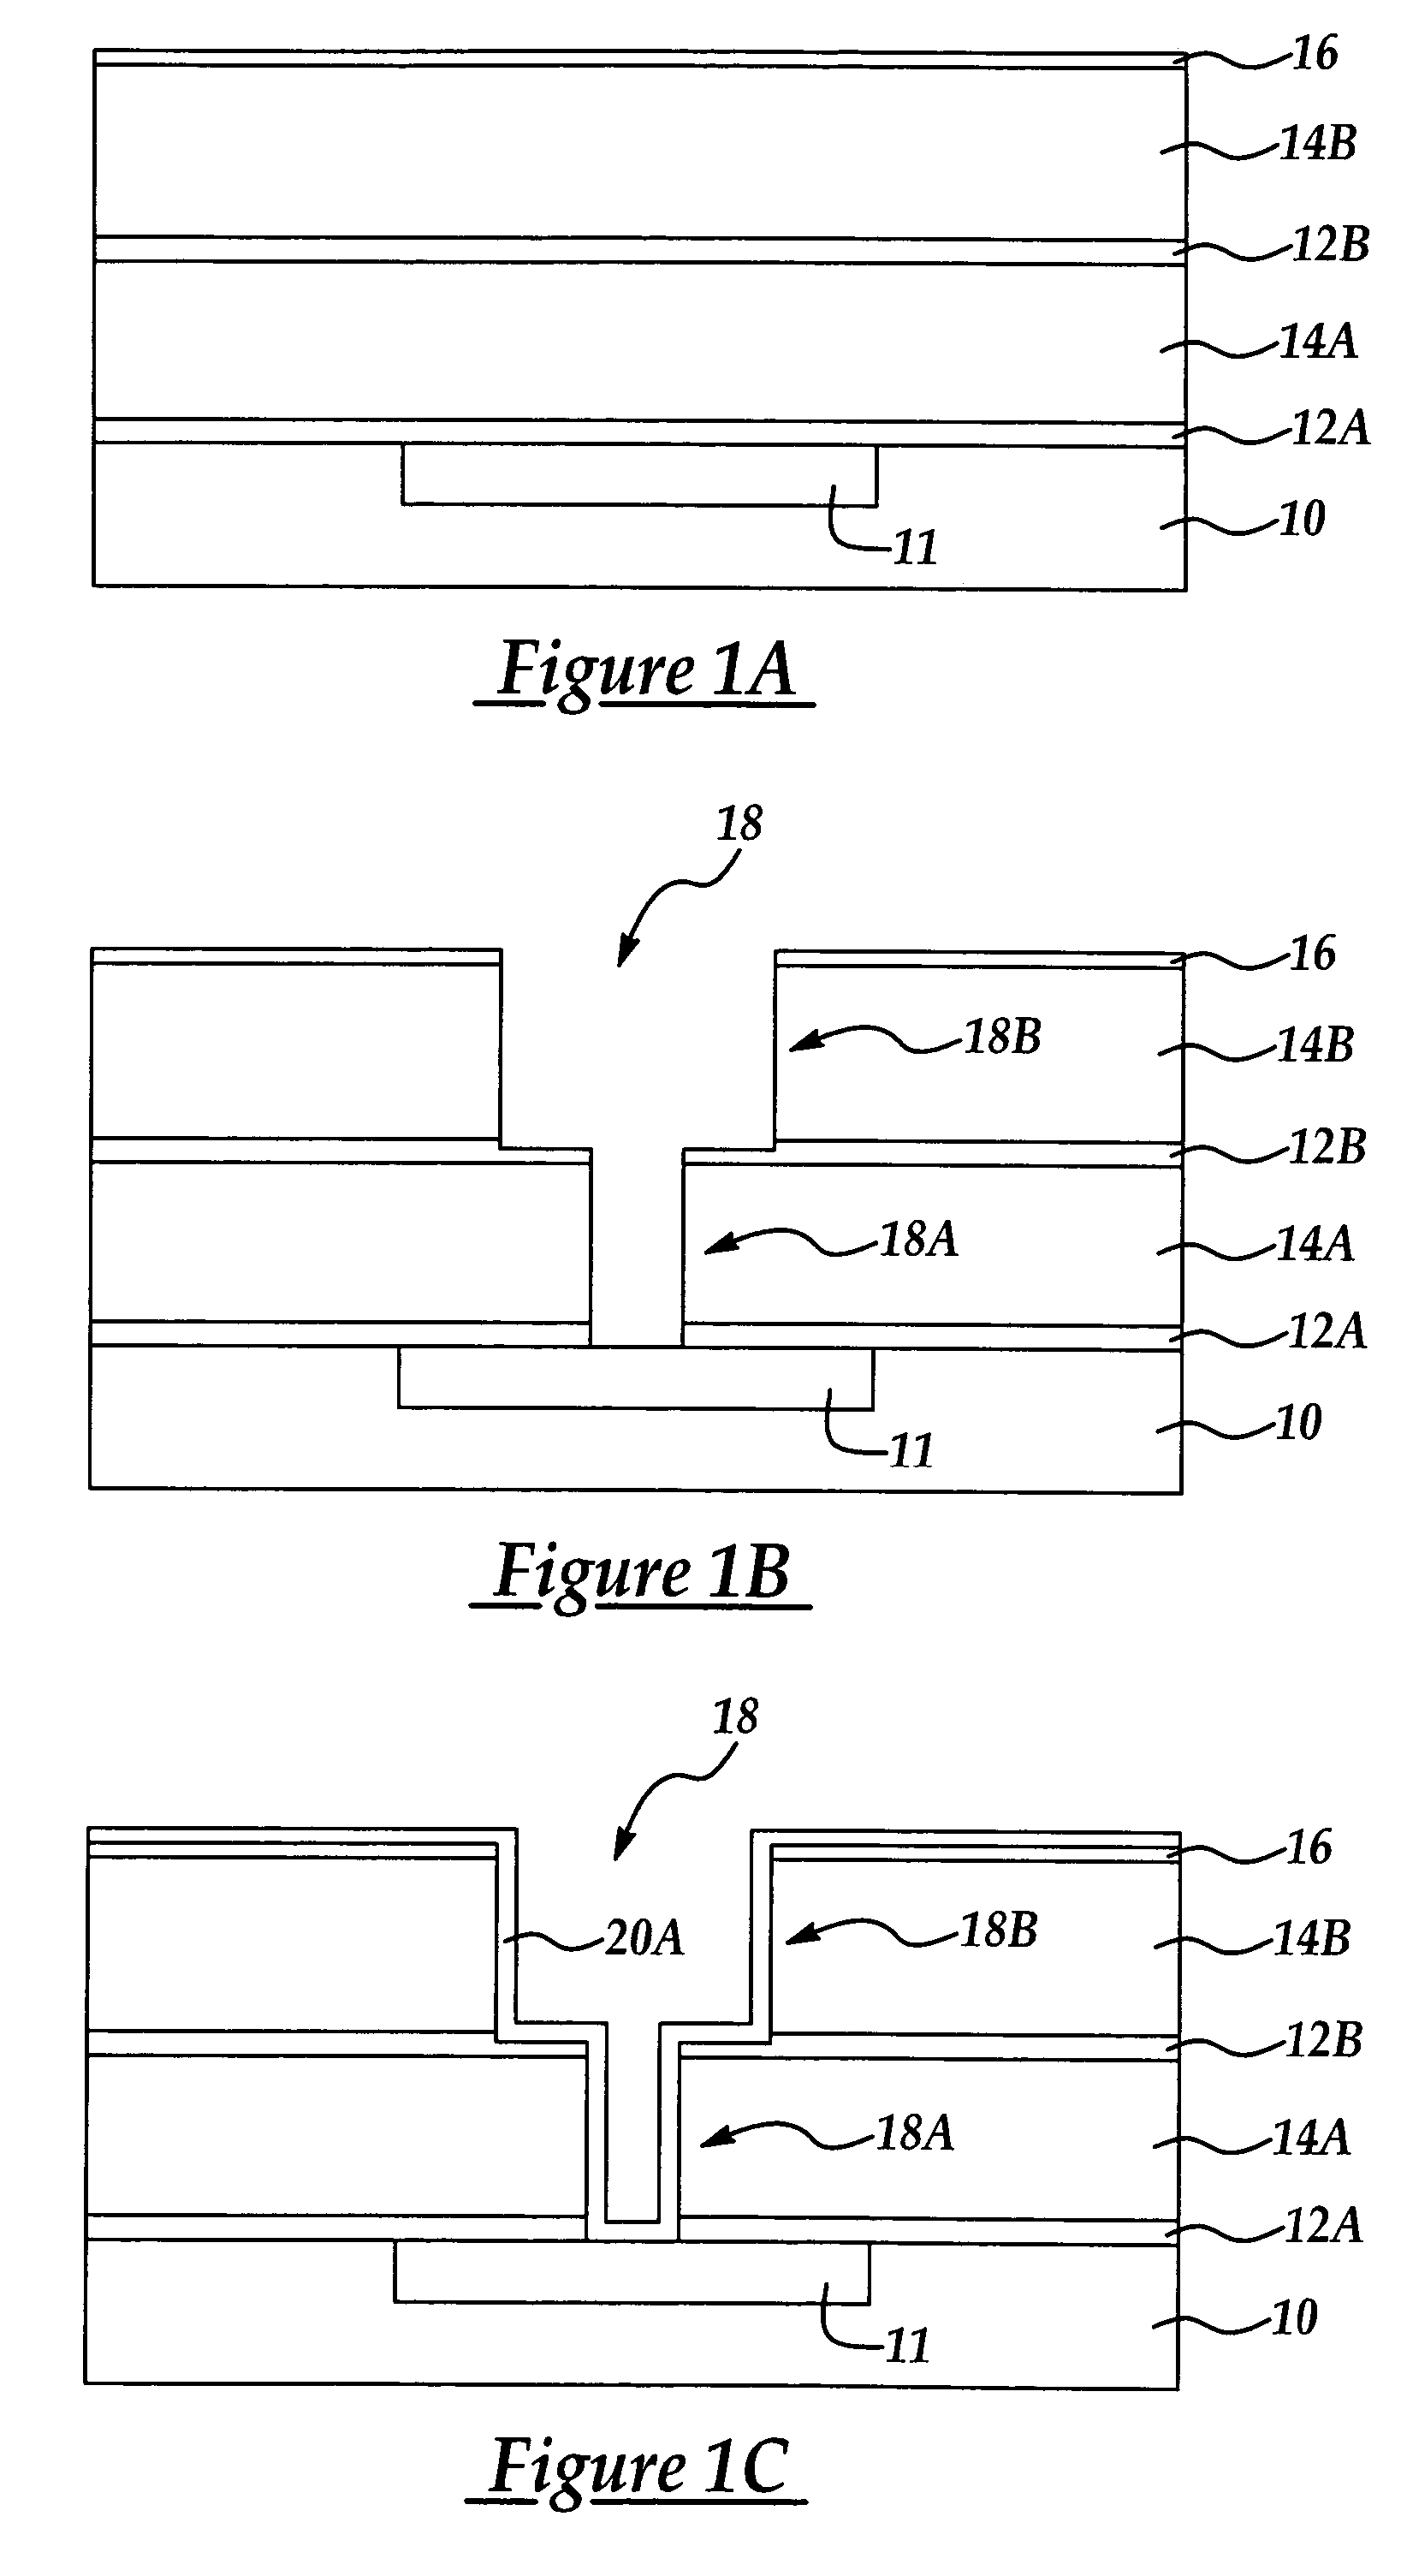 Method of forming barrier layer with reduced resistivity and improved reliability in copper damascene process